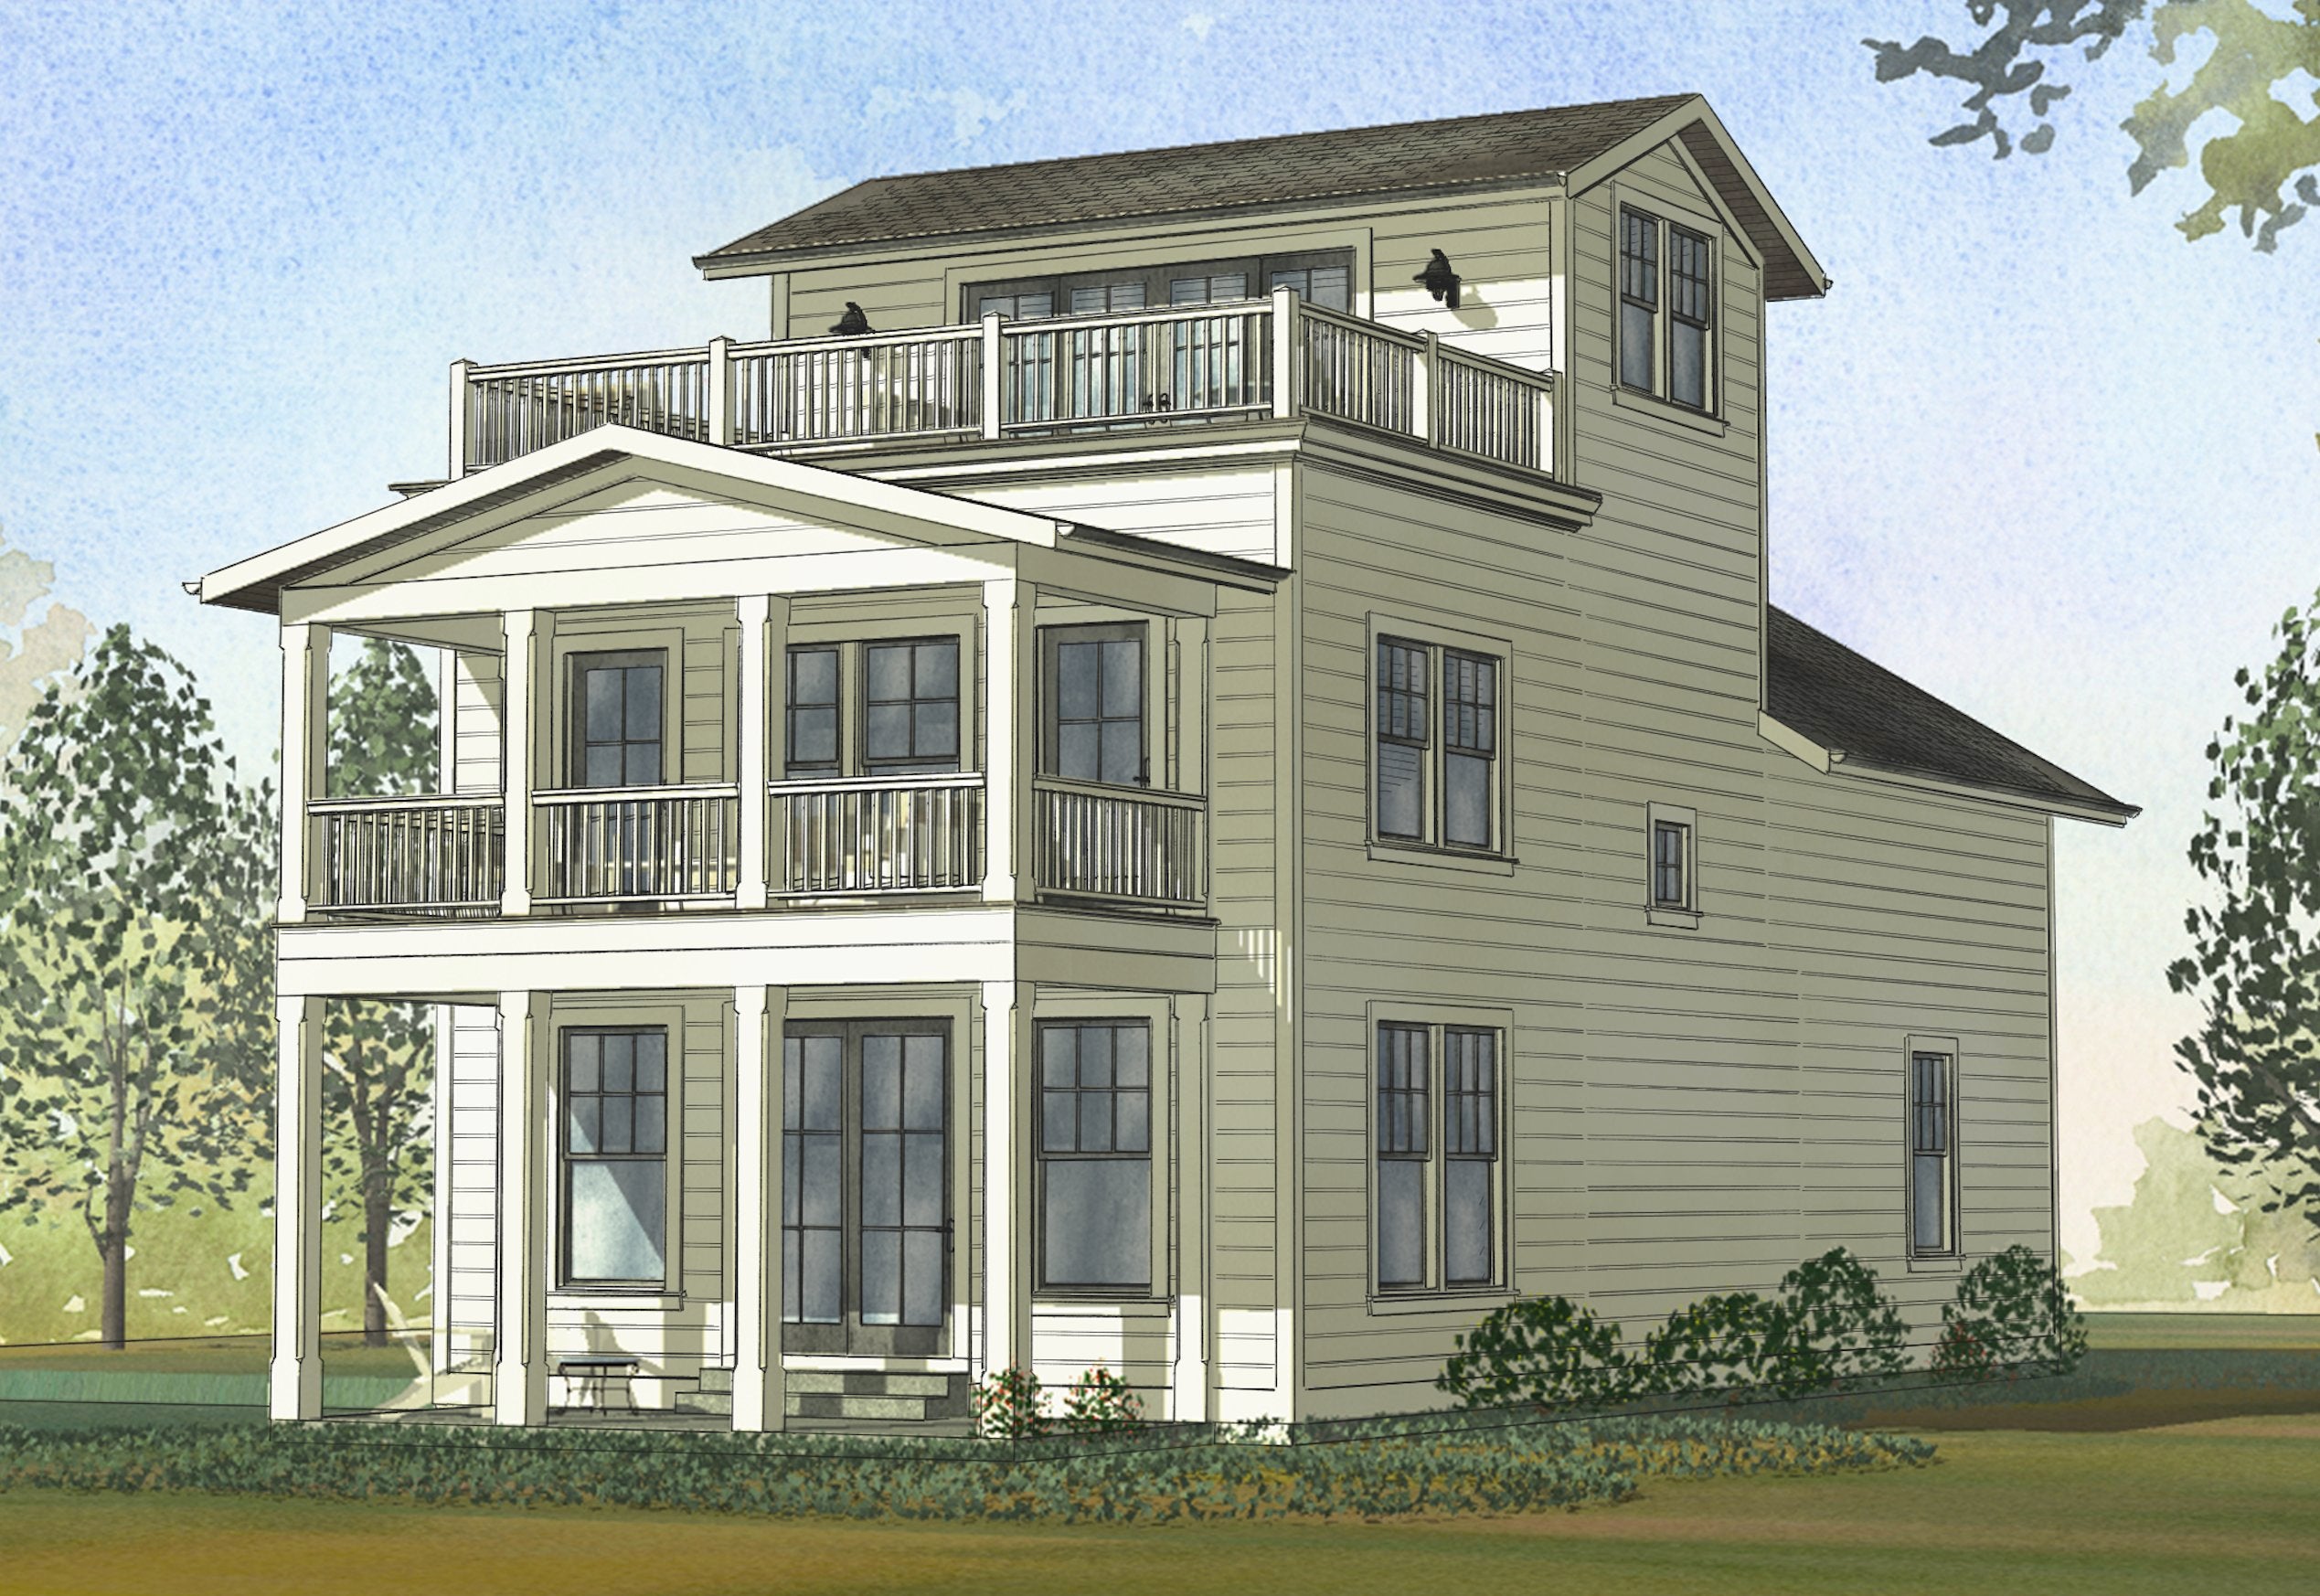 Featured House Plans | Wentworth Home Design | SketchPad House Plans